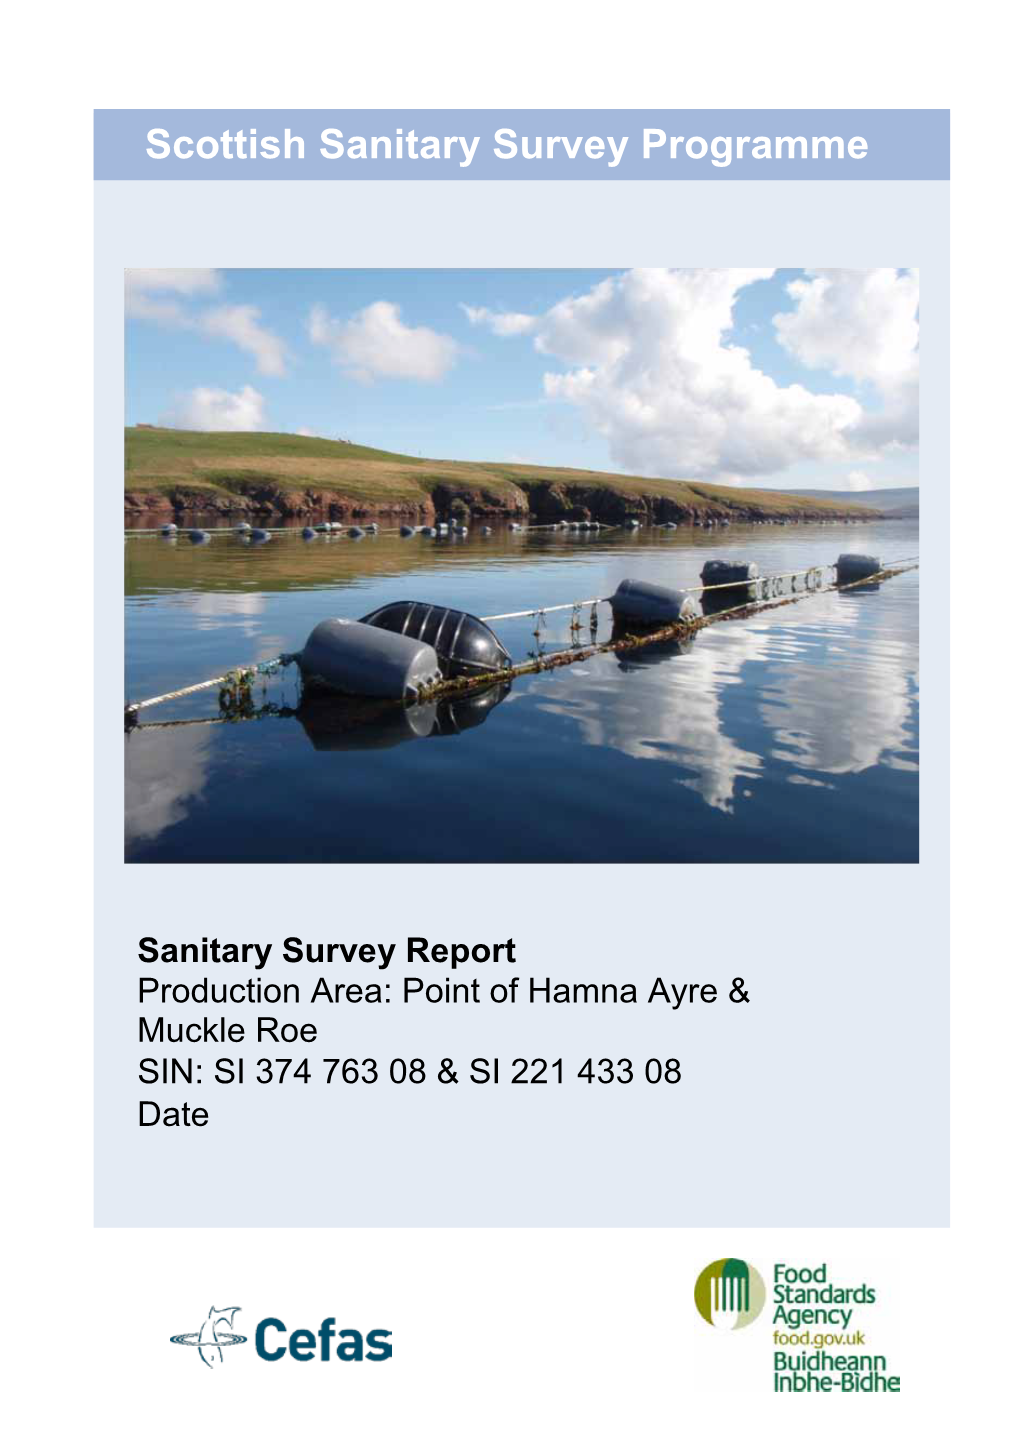 Sanitary Survey Report Production Area: Point of Hamna Ayre & Muckle Roe